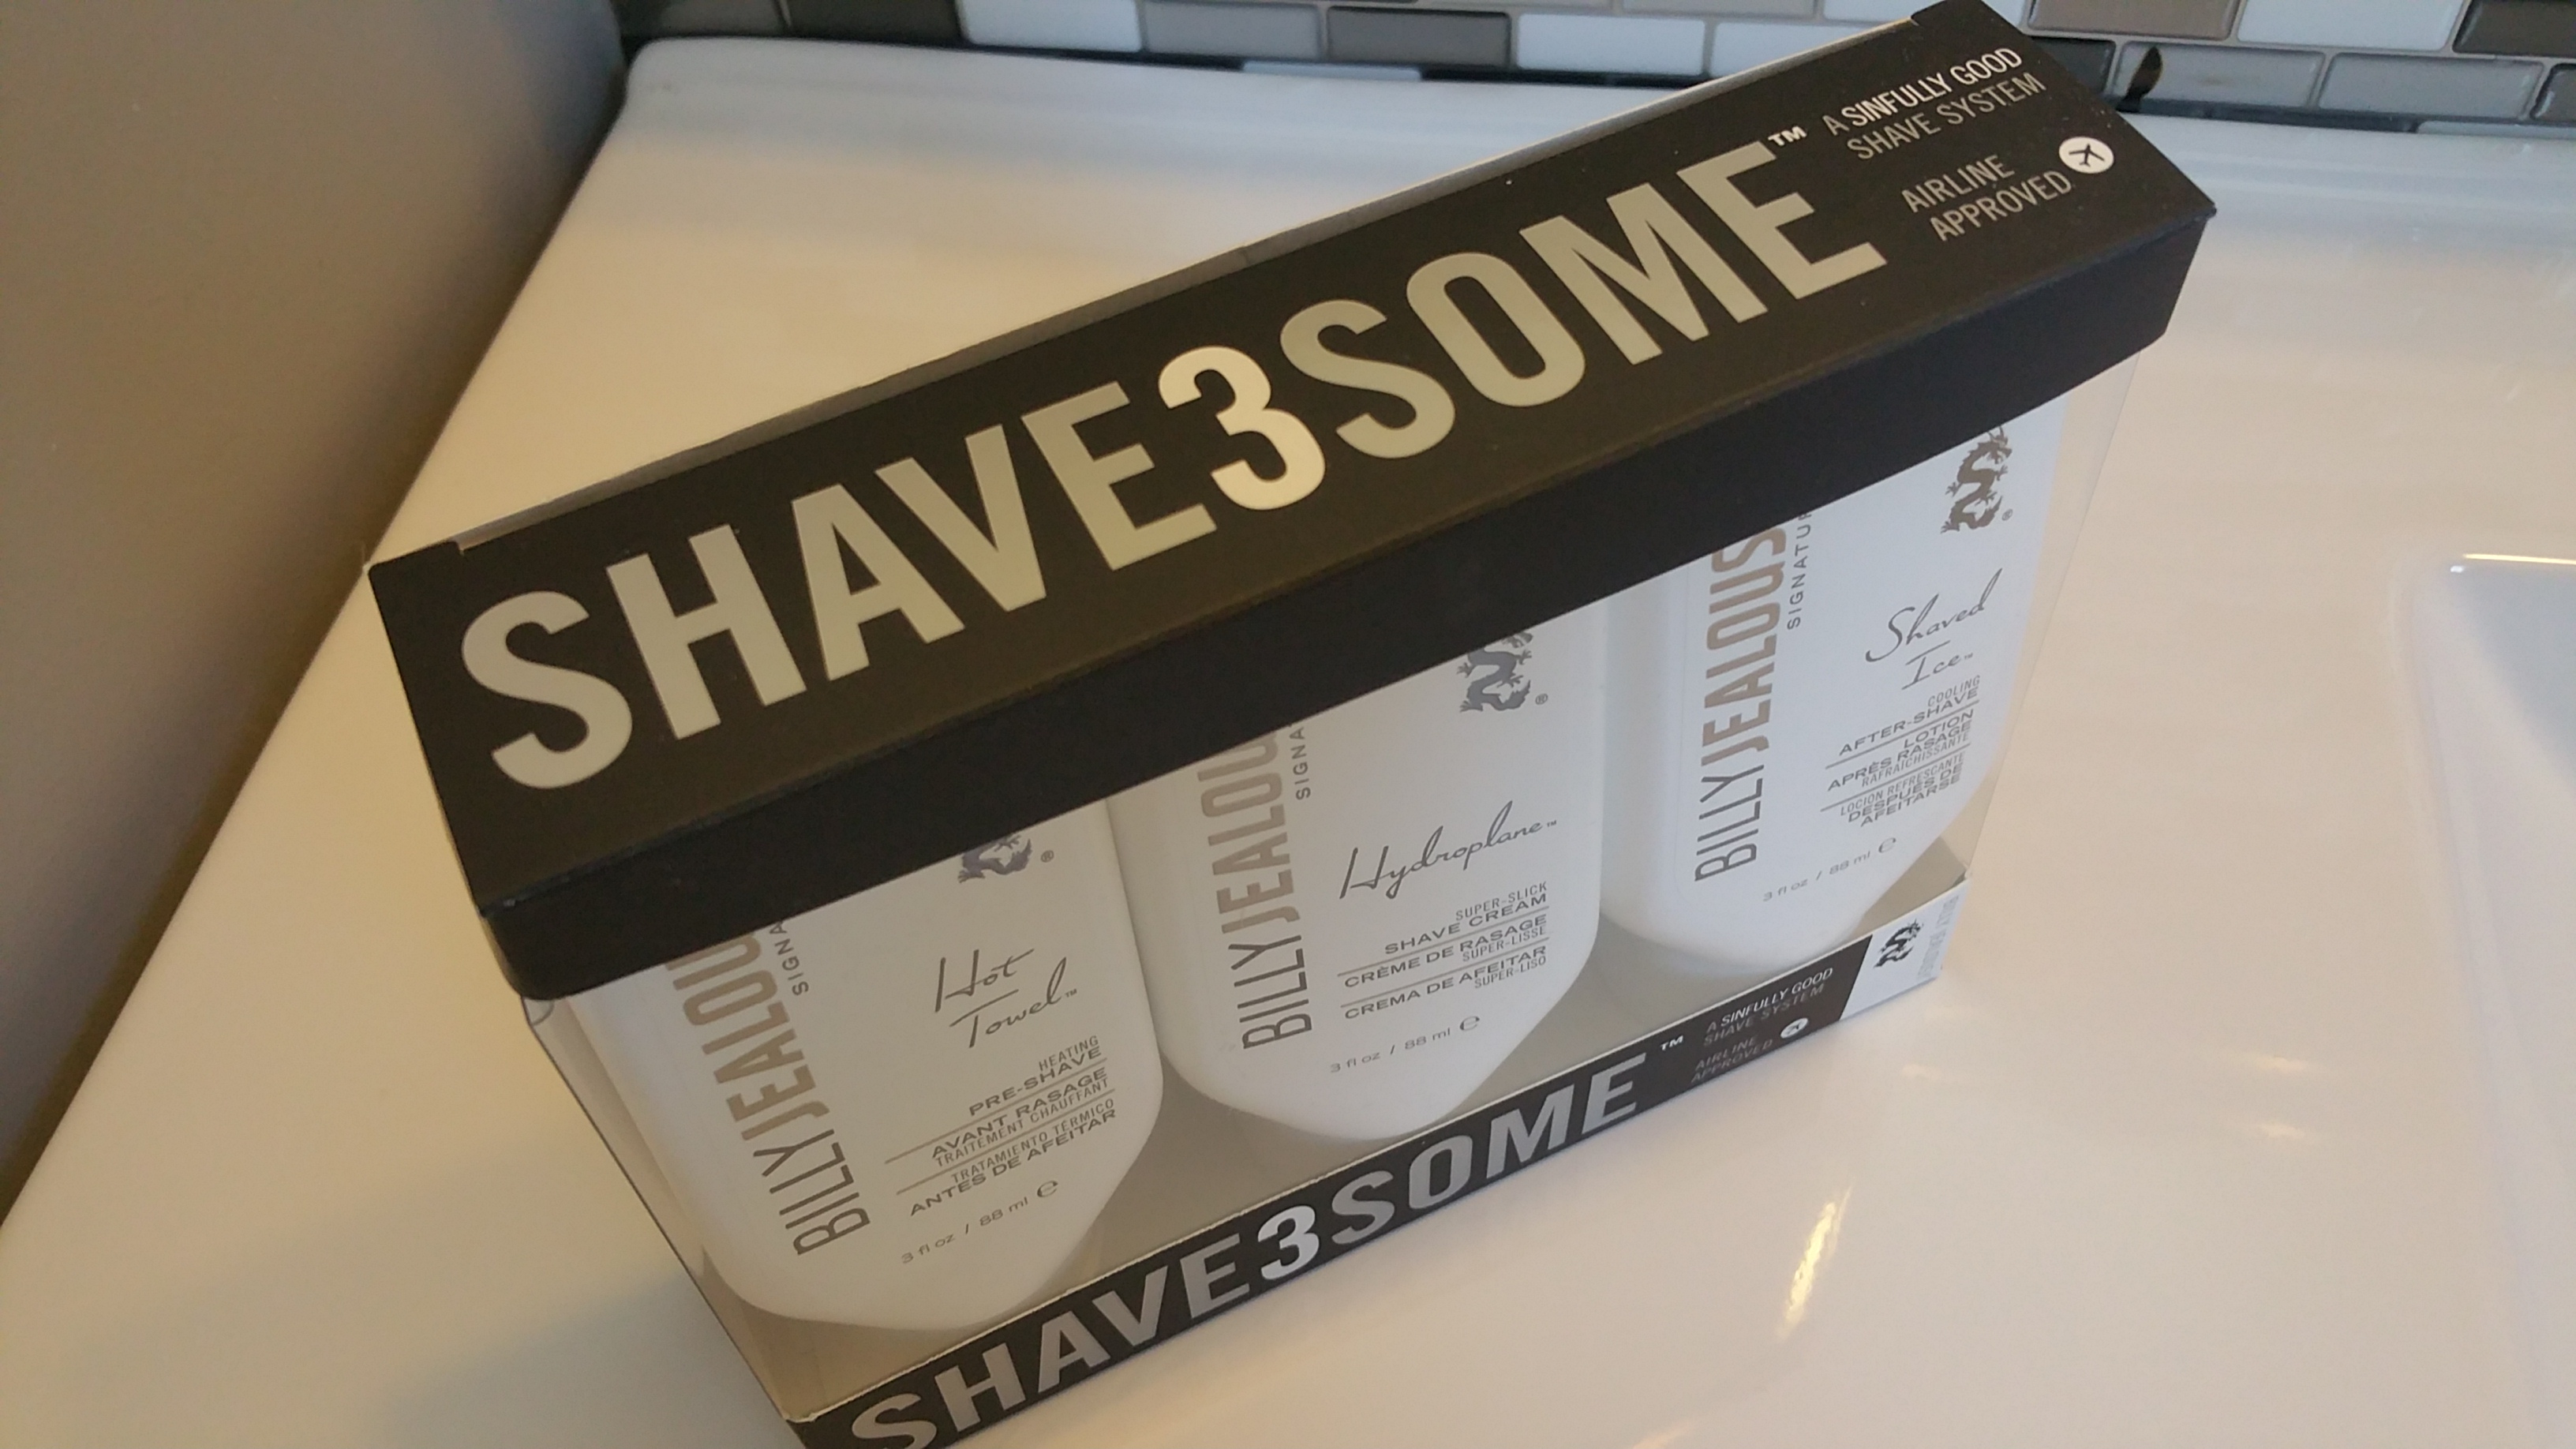 SHAVE3SOME